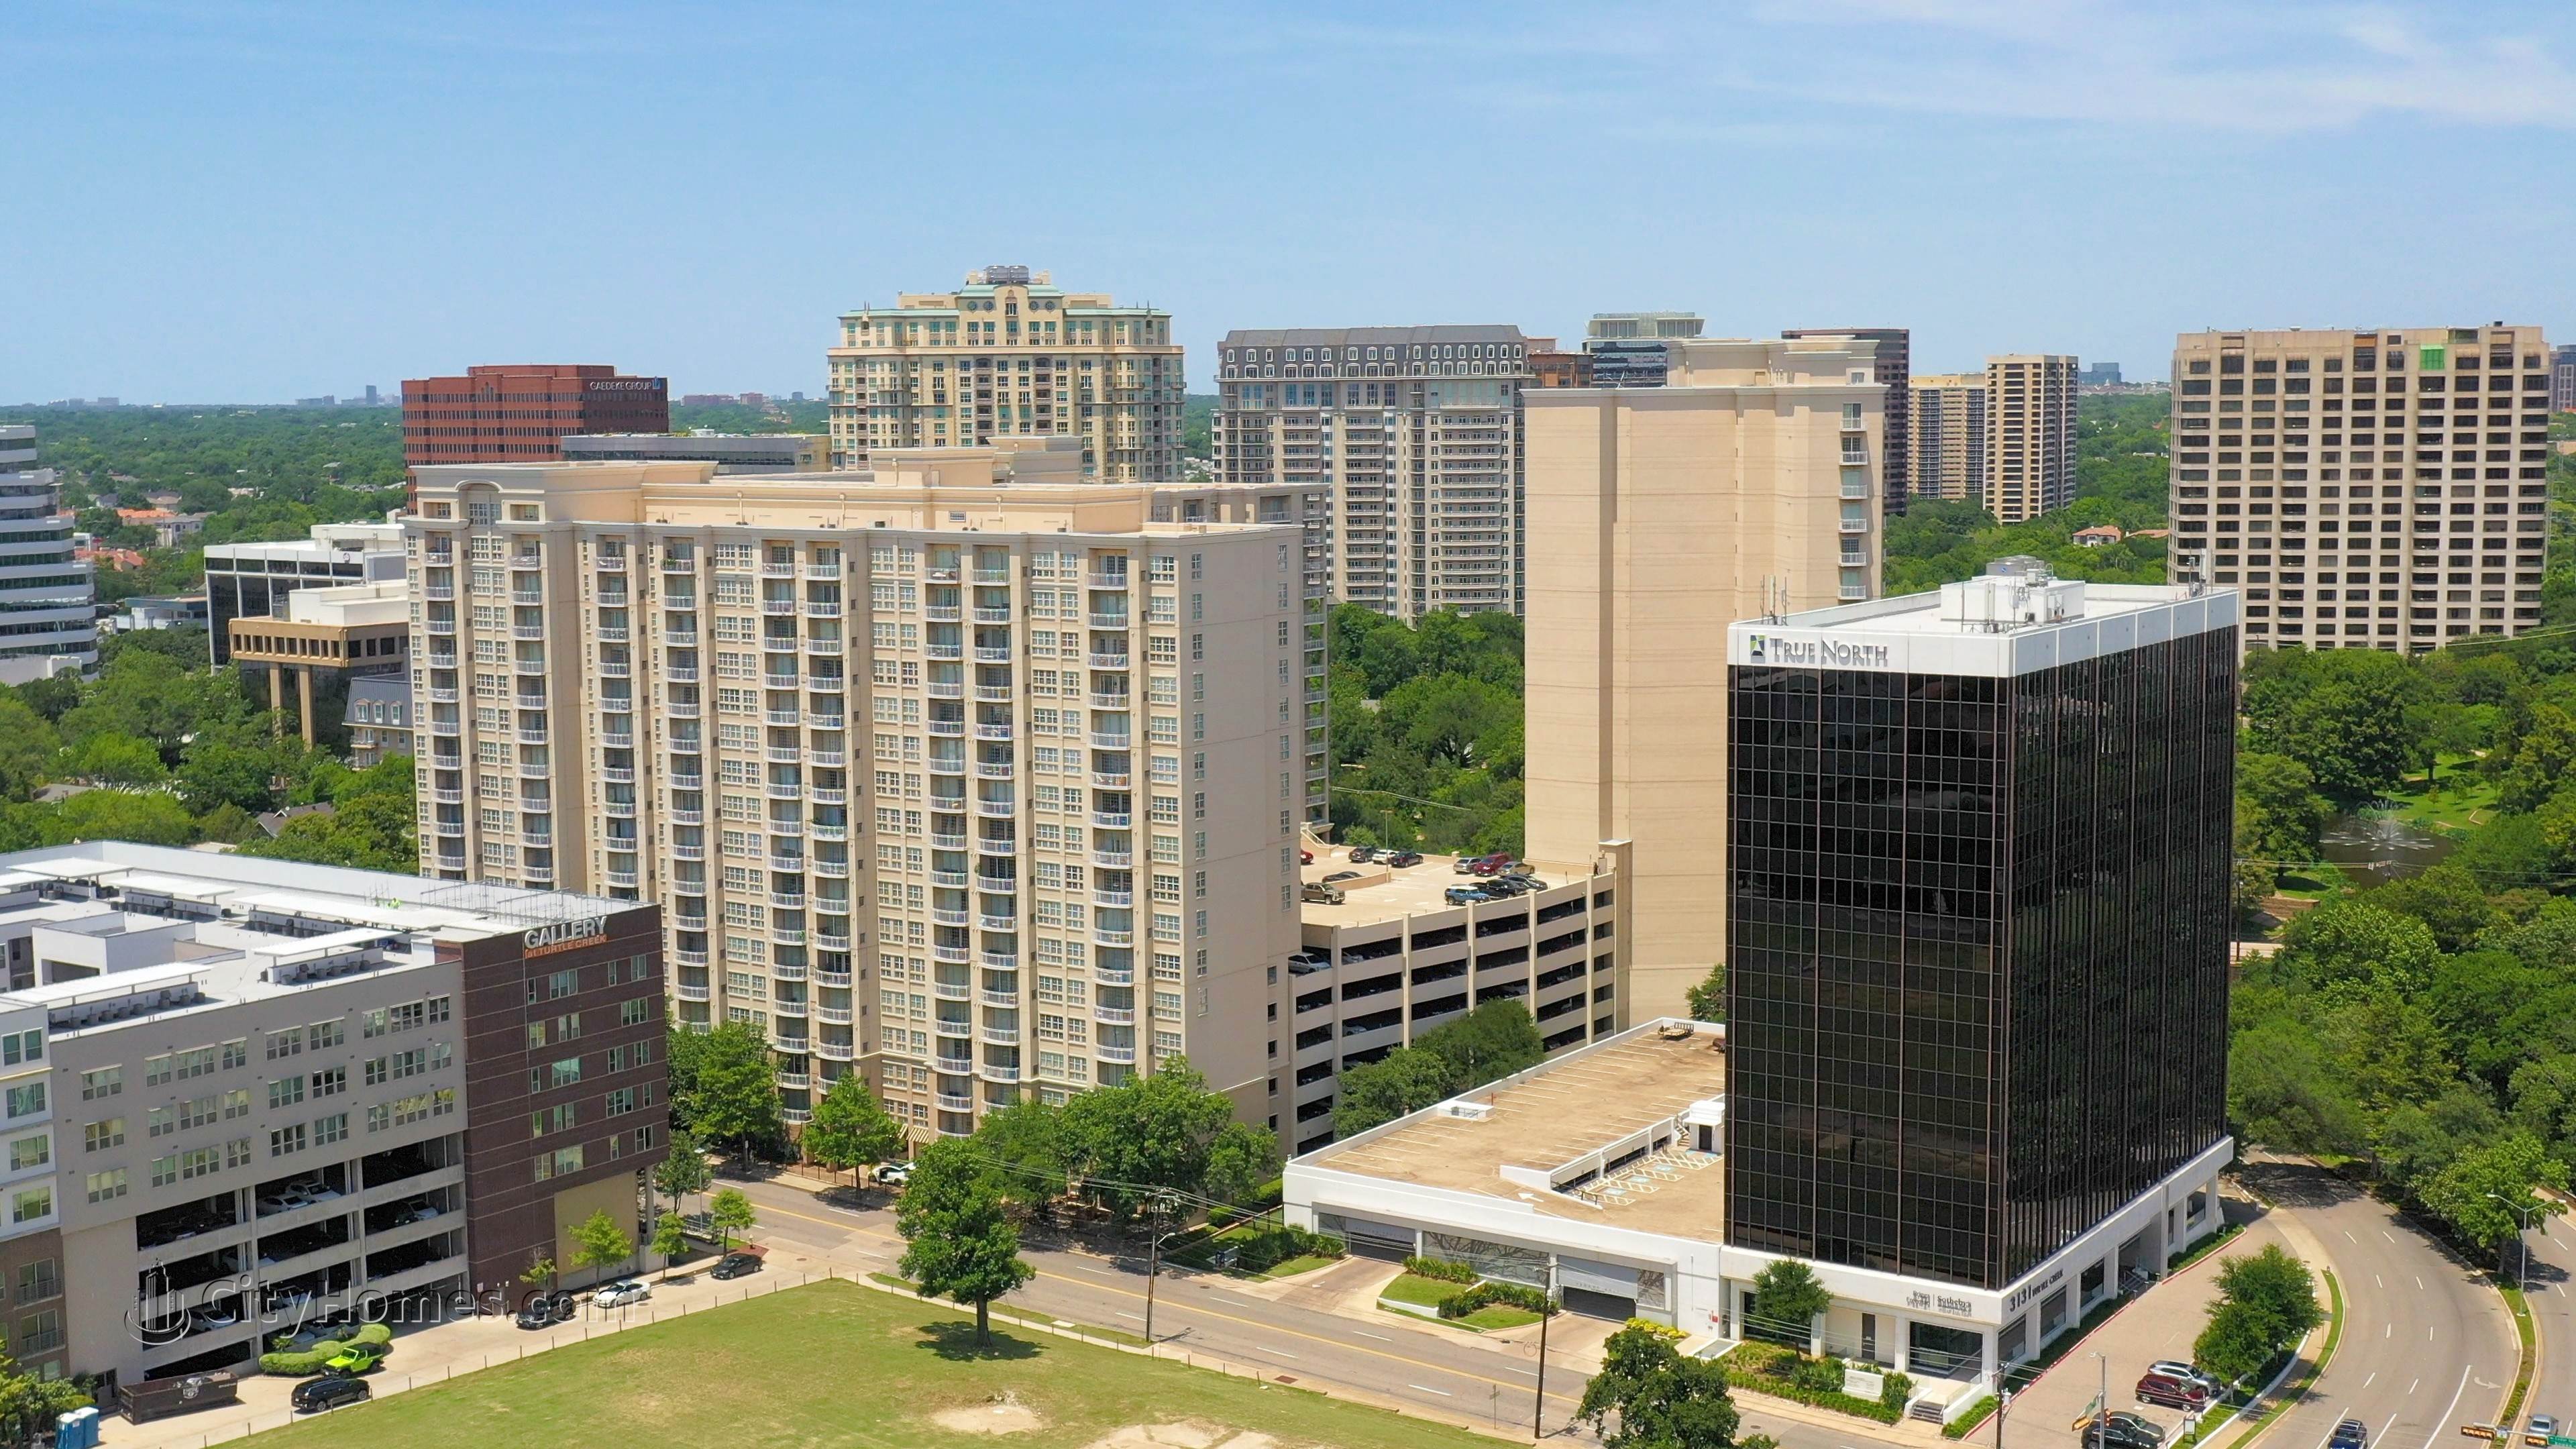 3. The Mayfair building at 3401 Lee Pkwy, Turtle Creek, Dallas, TX 75219